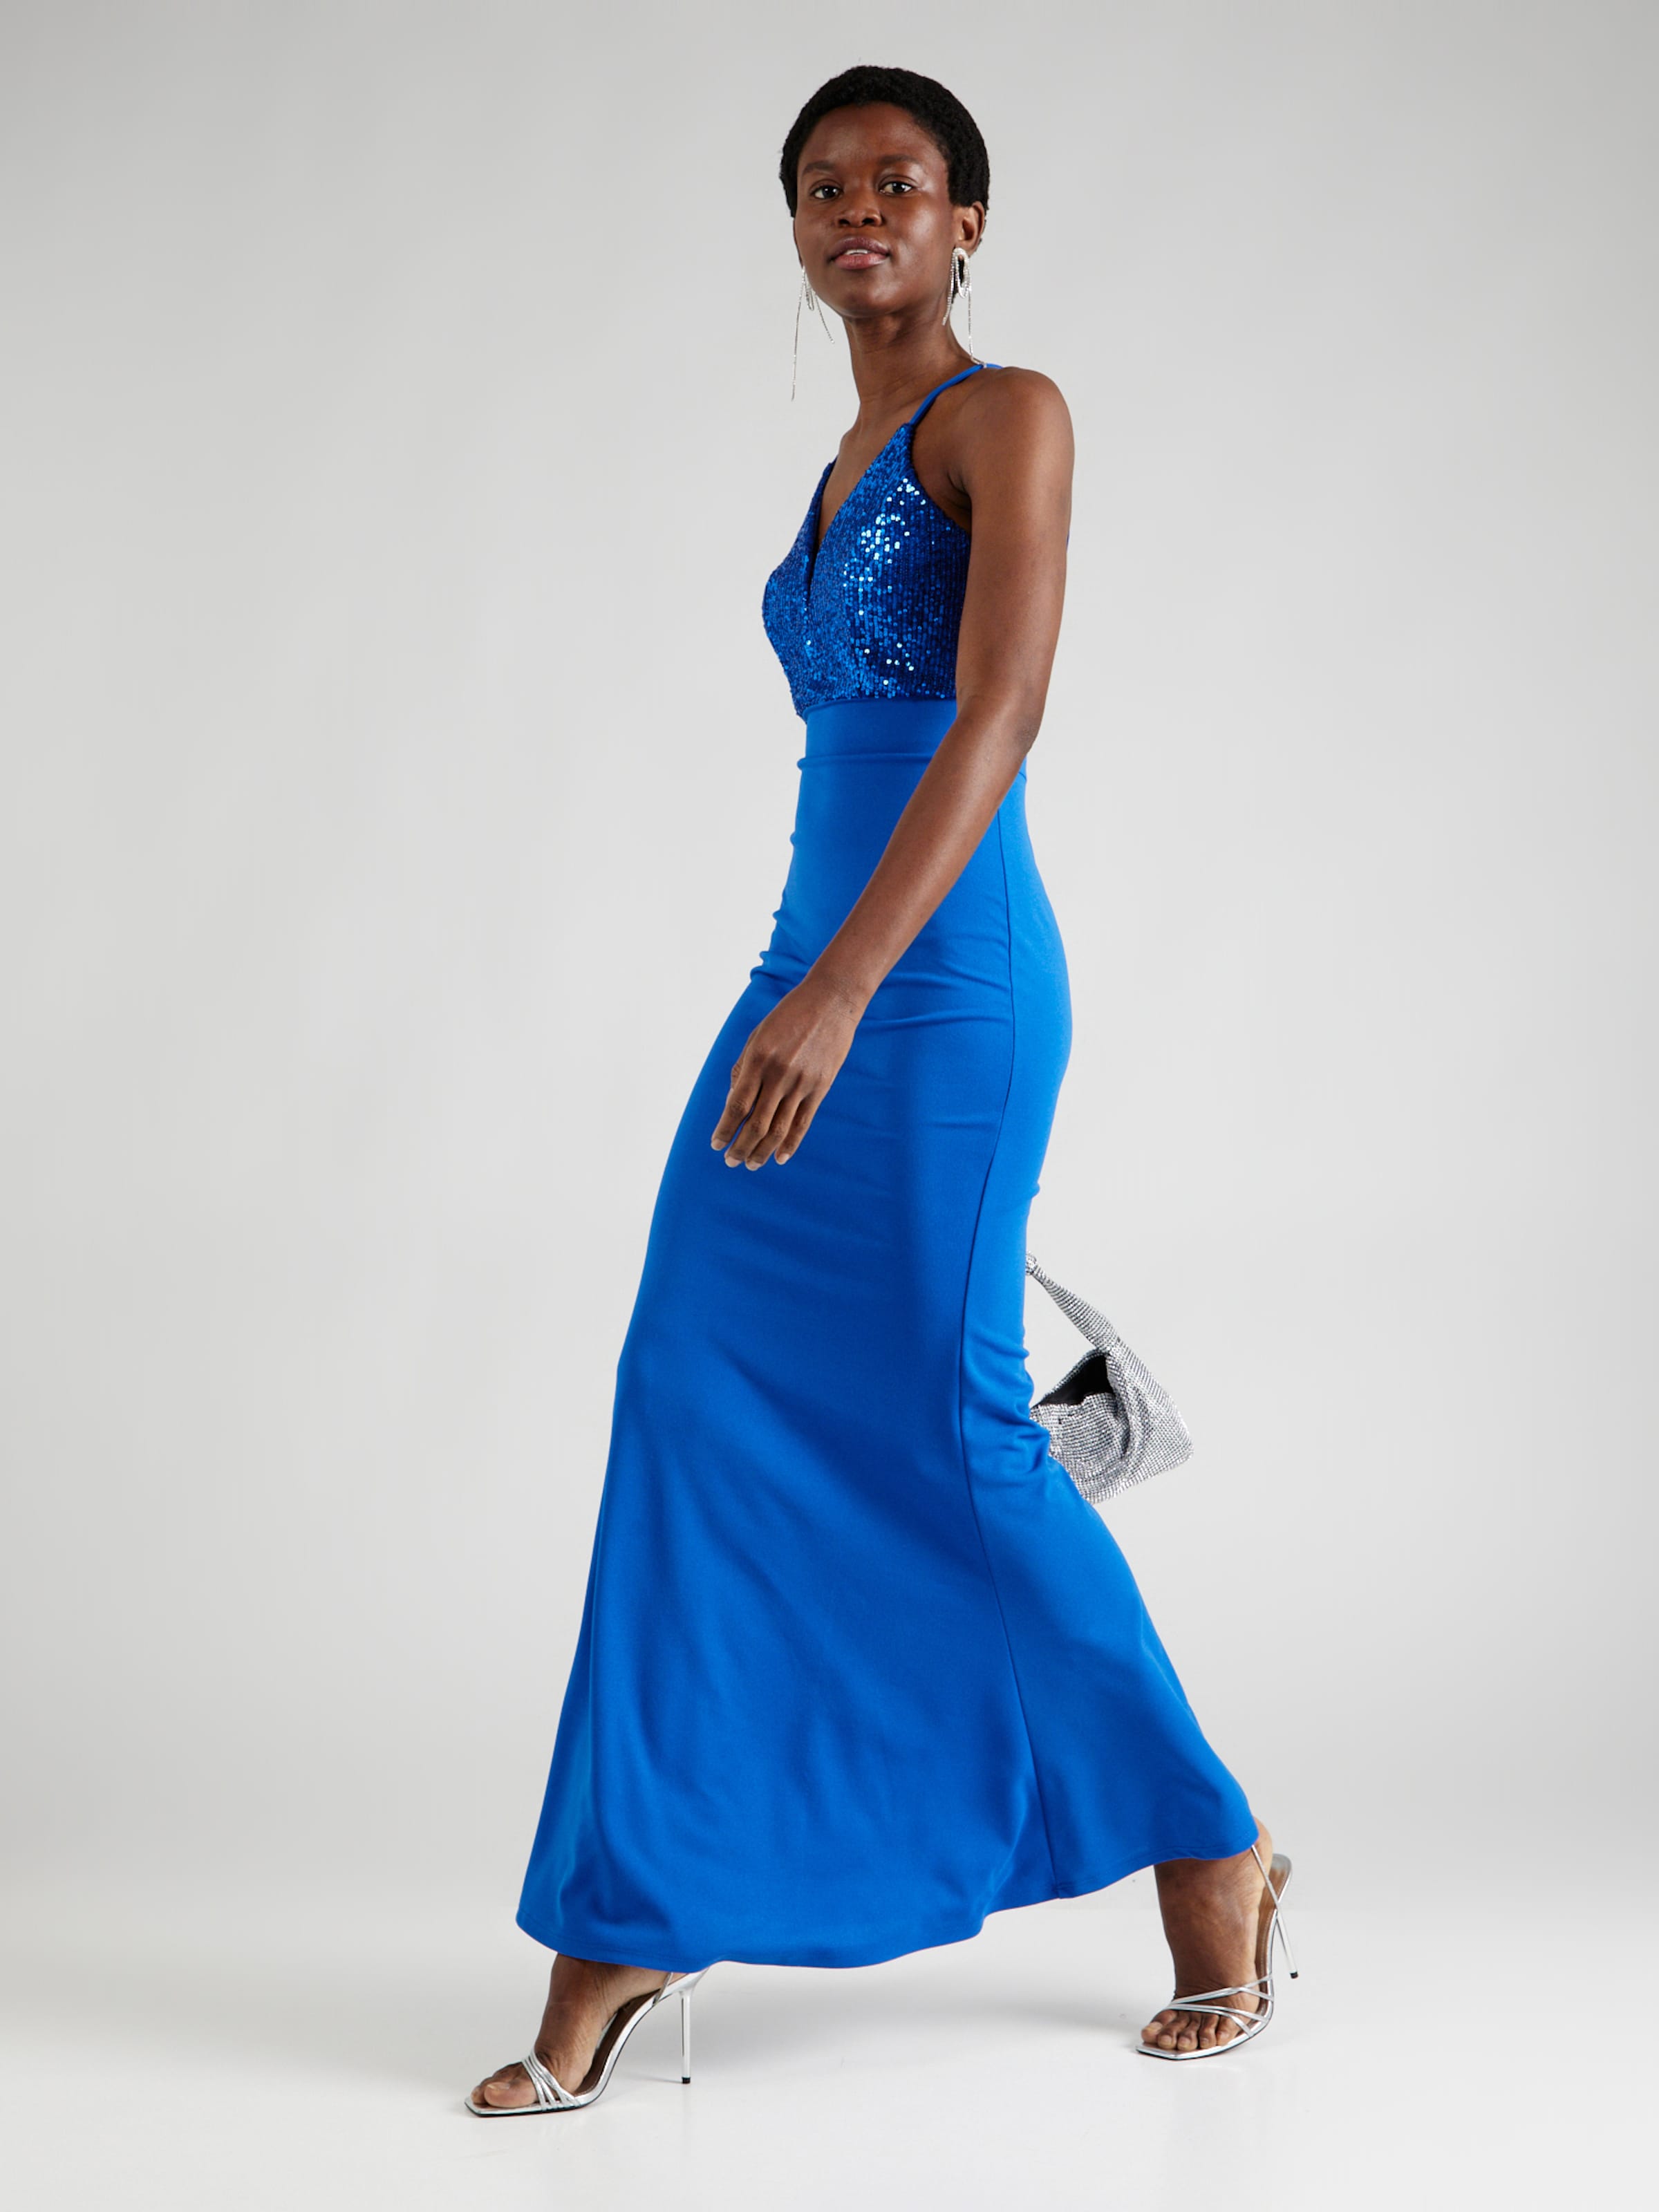 Royal Blue Lace Sequin Mermaid Cobalt Blue Evening Dress With Deep V Neck  And Sweep Train For Plus Size Black Girls From Dressvip, $164.03 |  DHgate.Com